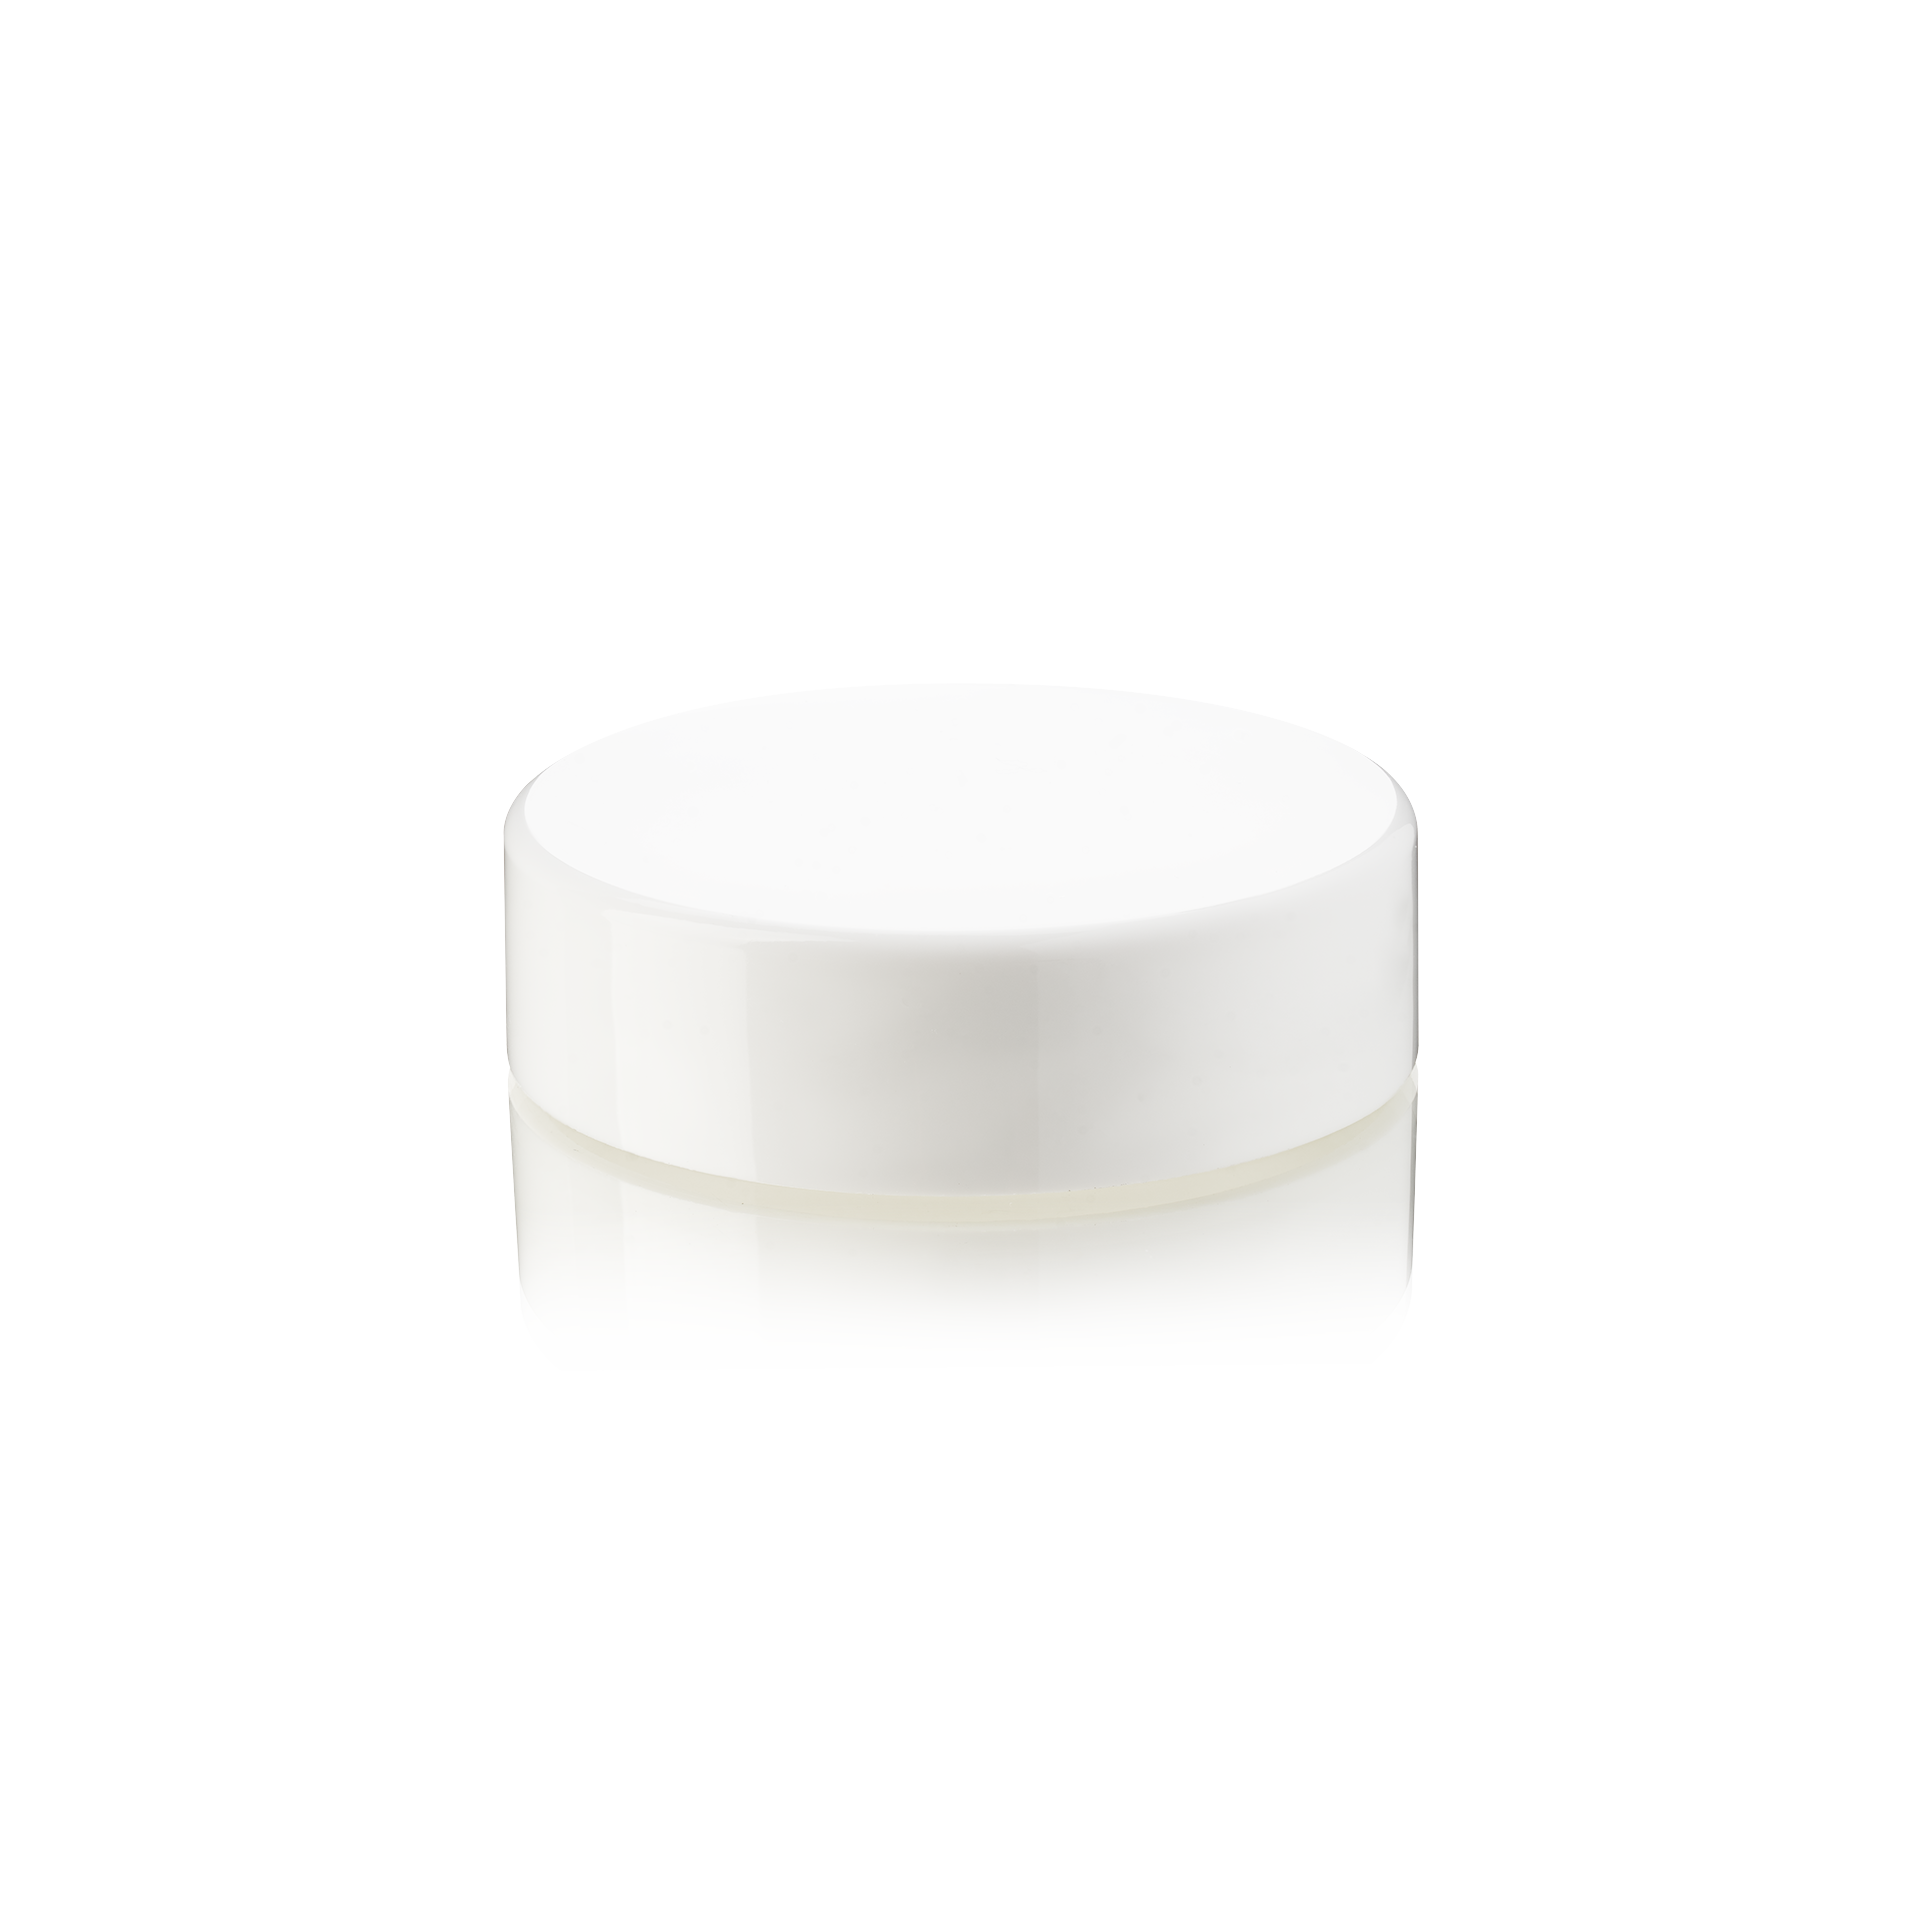 Lid Modern 58 special, PP, white, glossy finish, white inlay (Aspen 100)